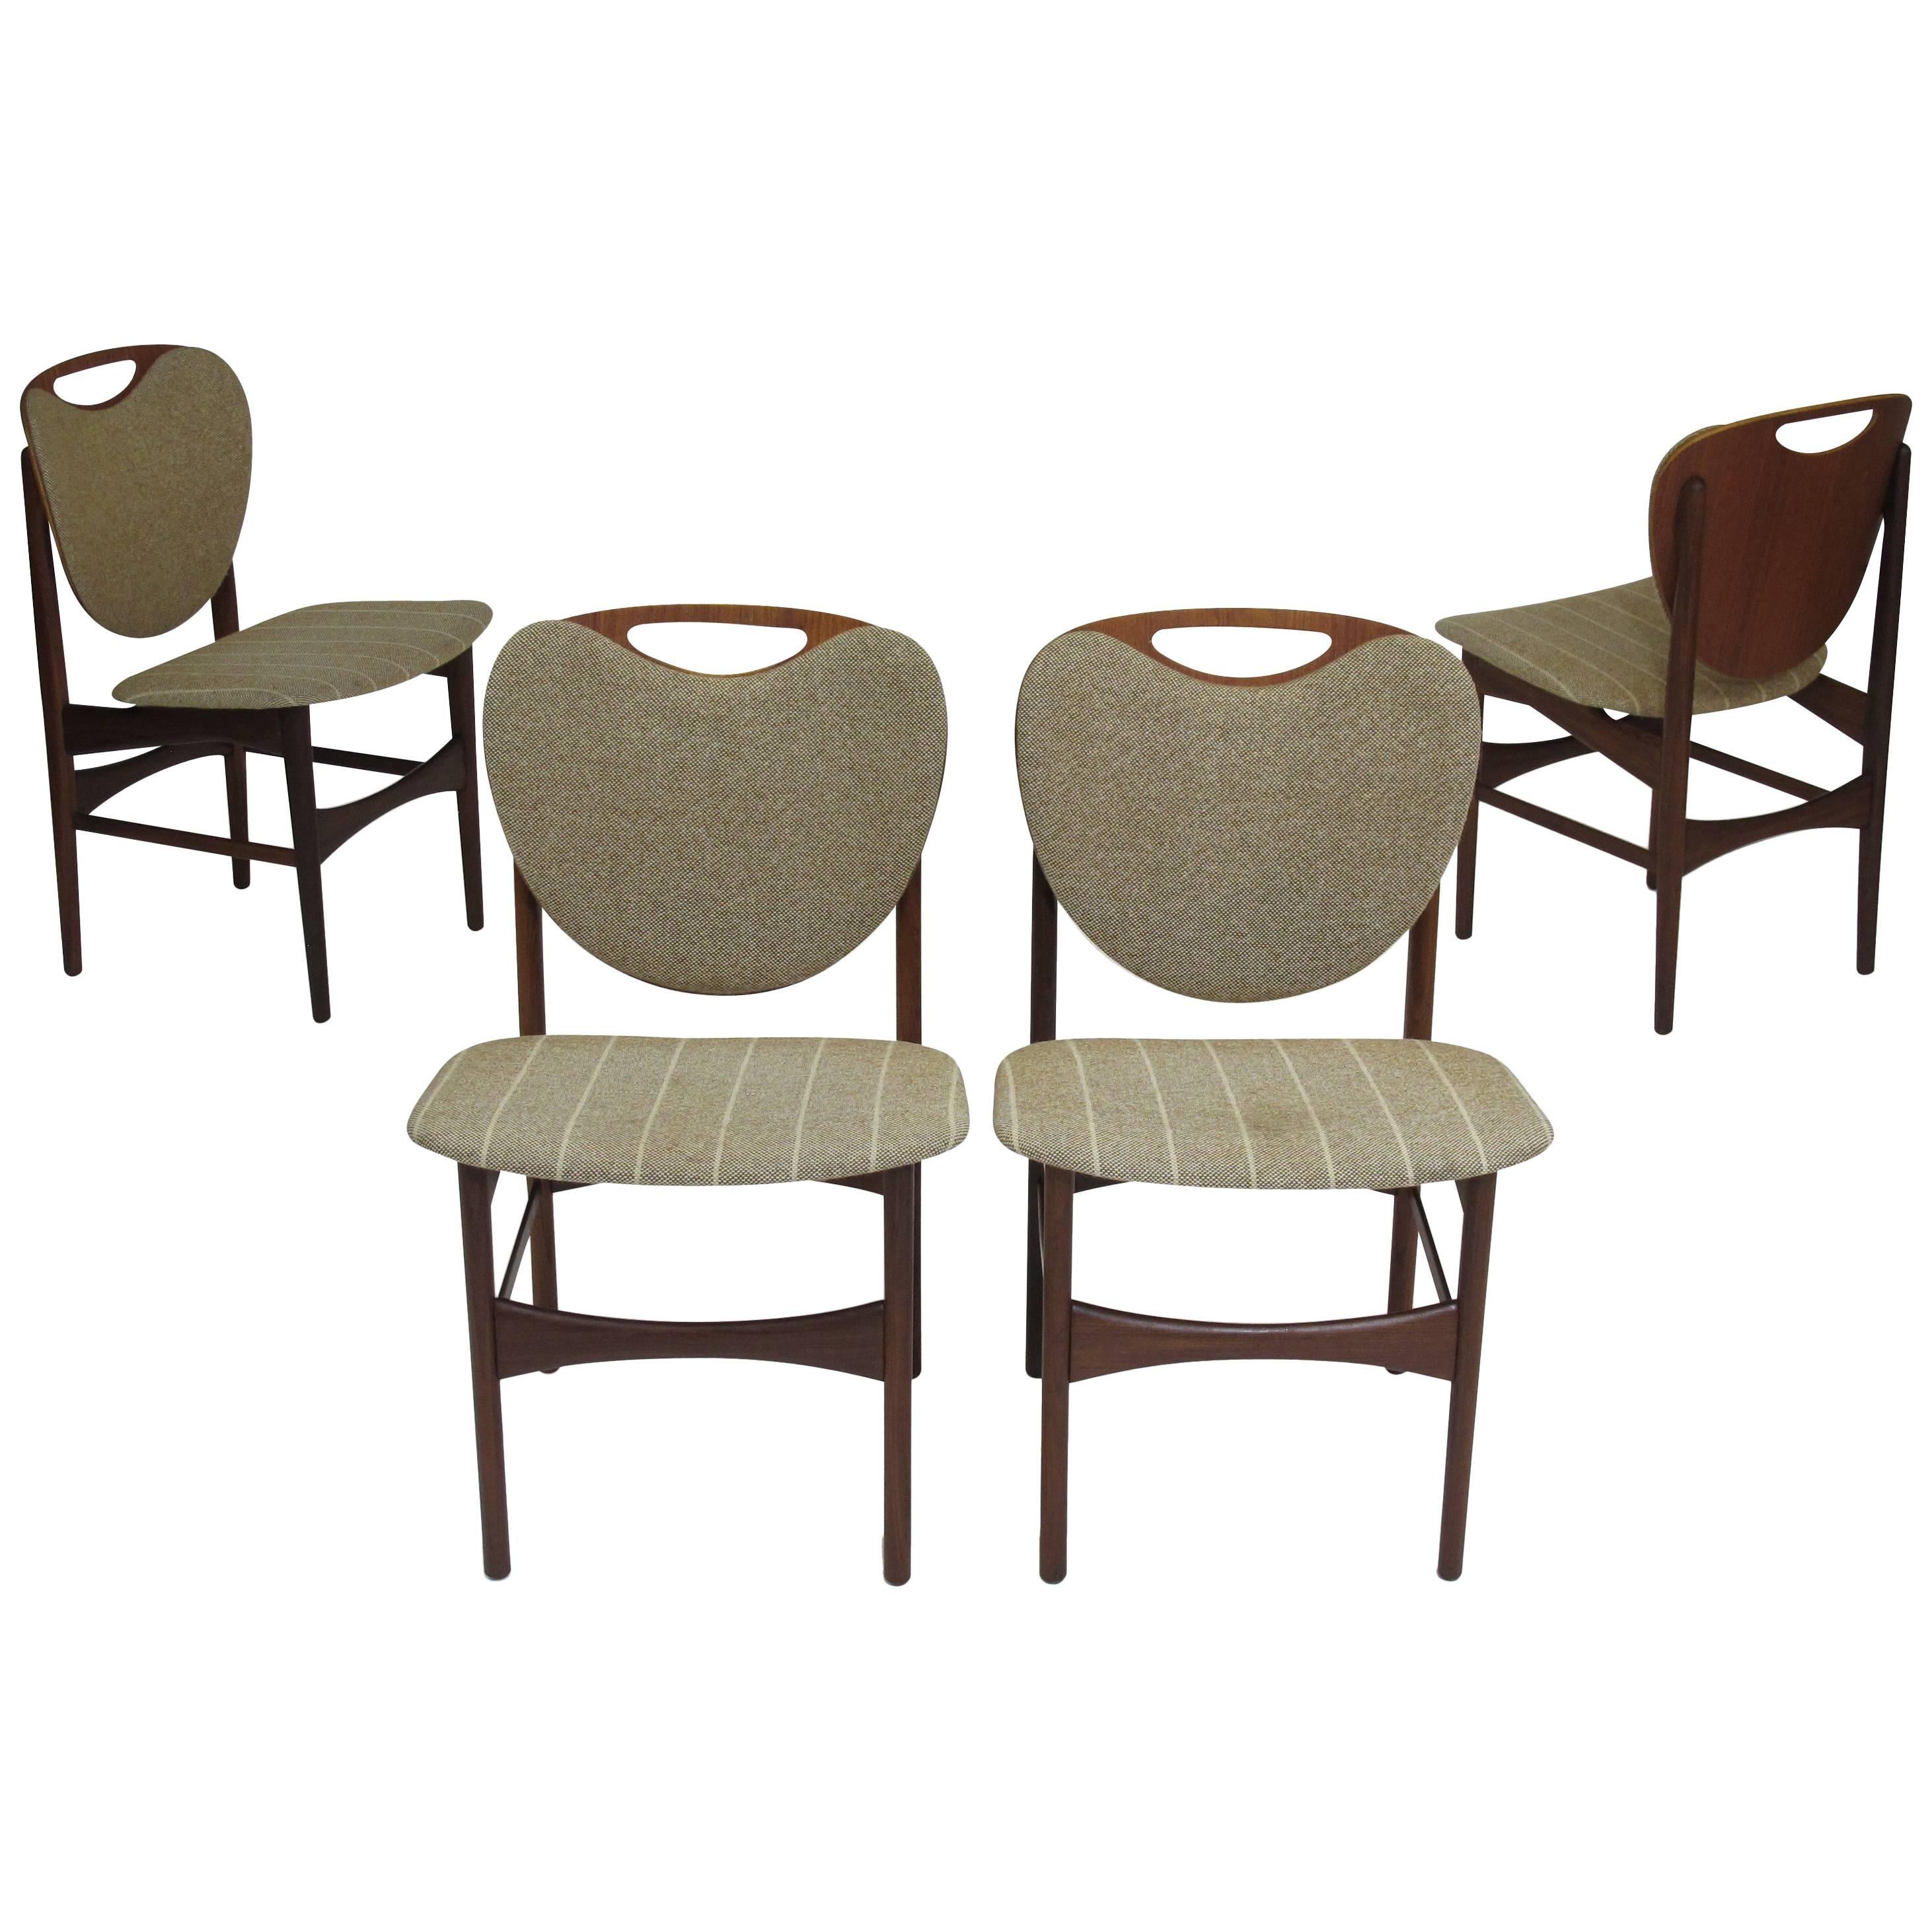 Four Shield Back Teak Dining Chairs